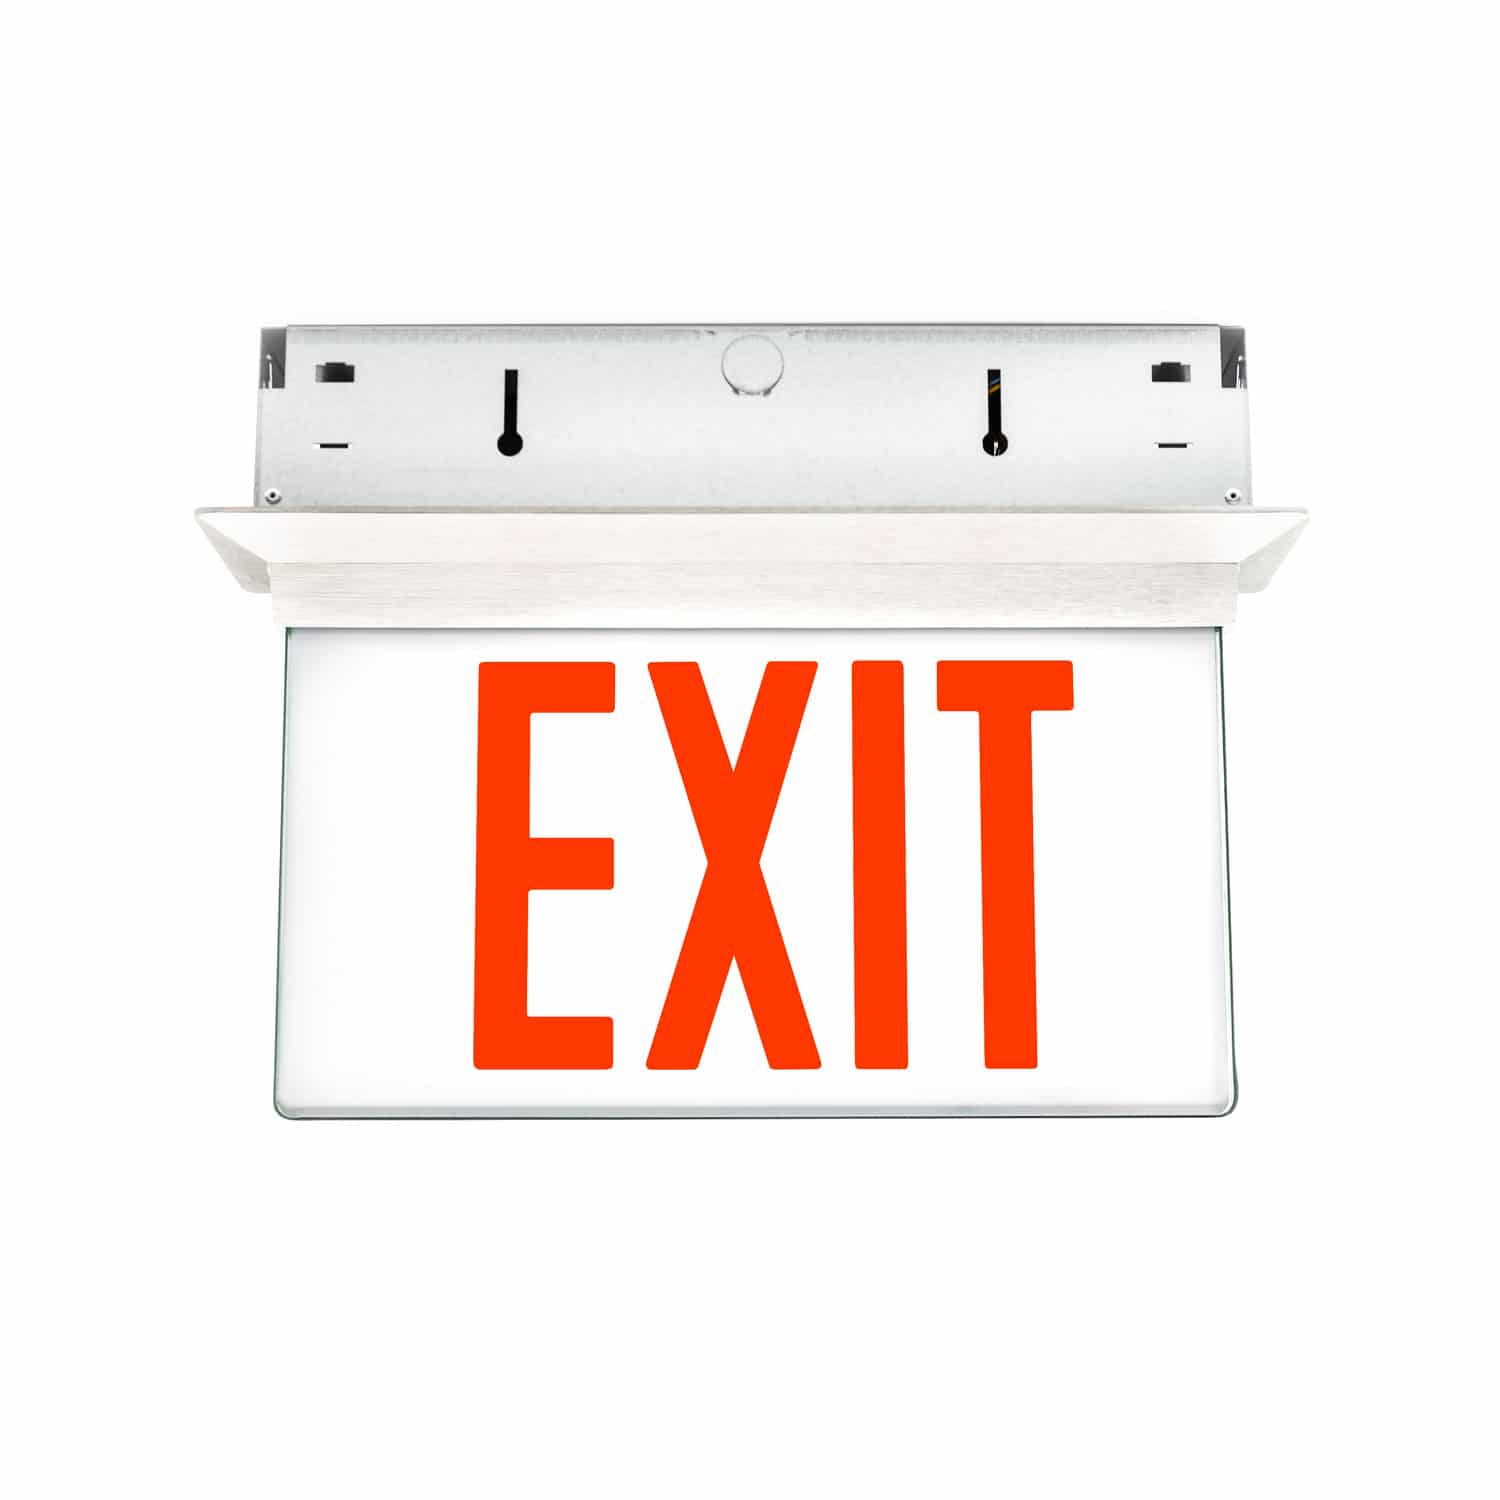 Elite Edge-Lit Exit Sign with a low profile recessed housing unit that is suitable for old or new work installations. The Isolite ELT.